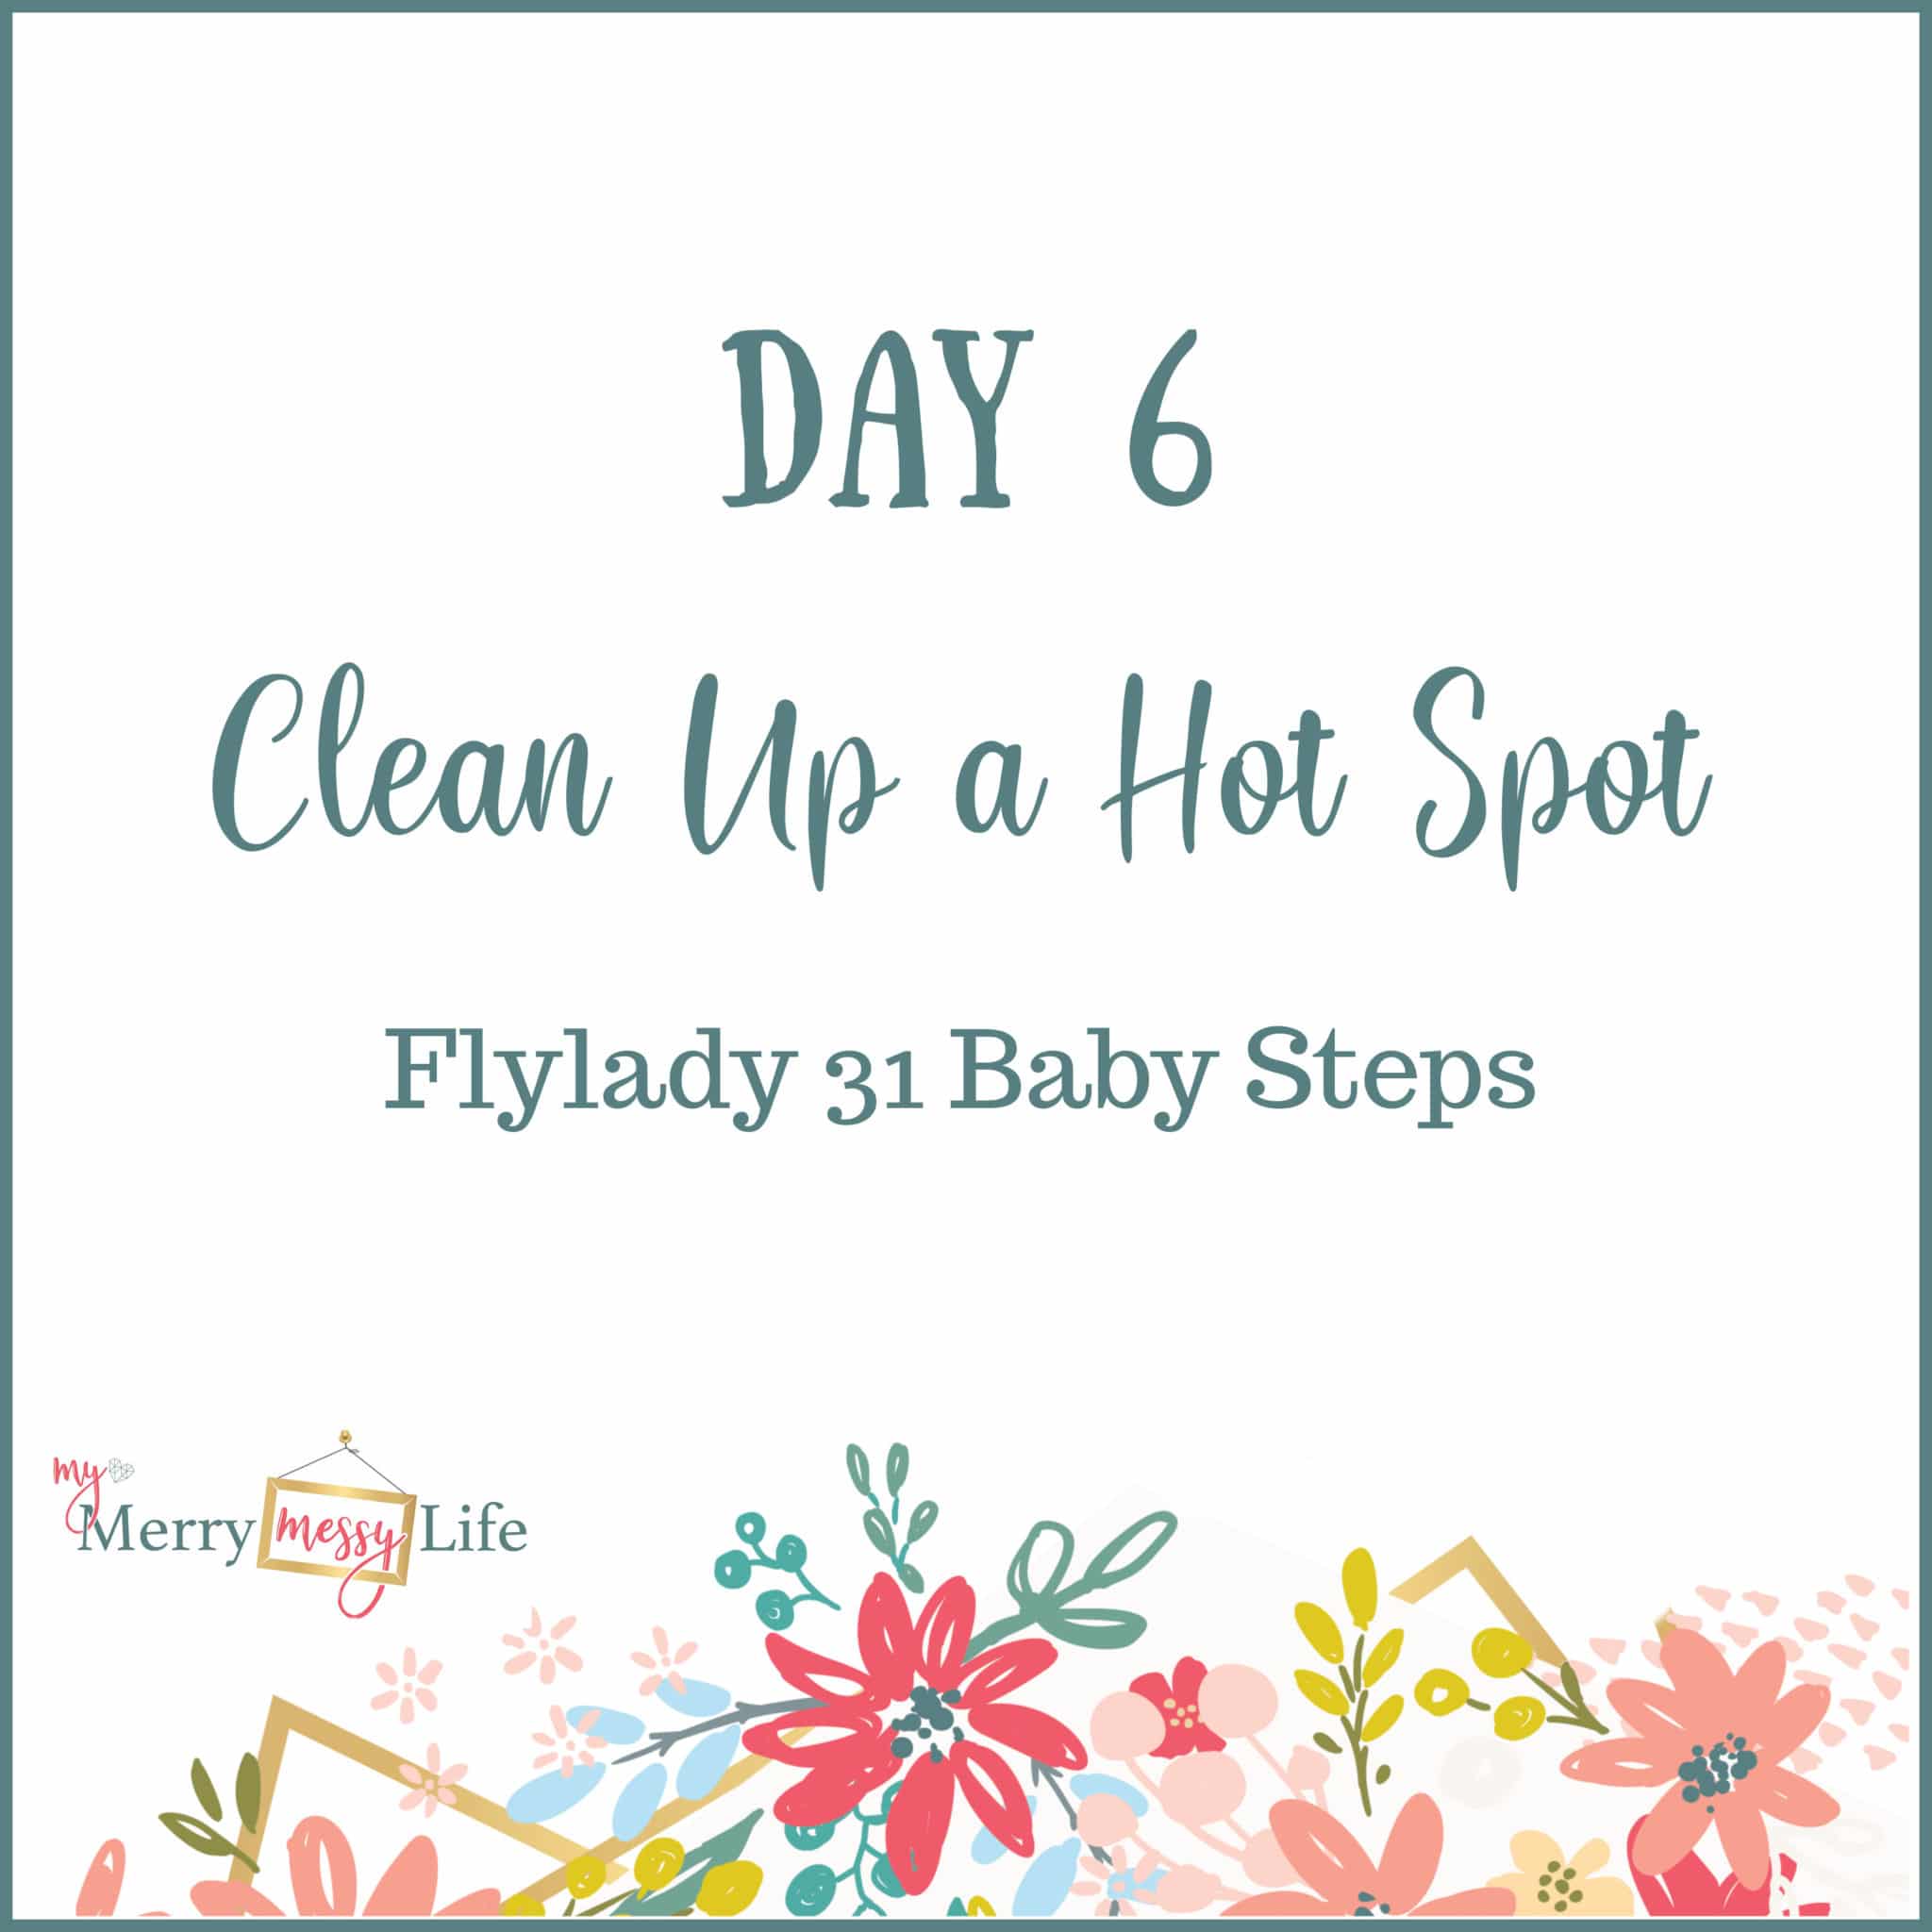 Flylady 31 Baby Steps - Day 6 - Clean Up a Hot Spot